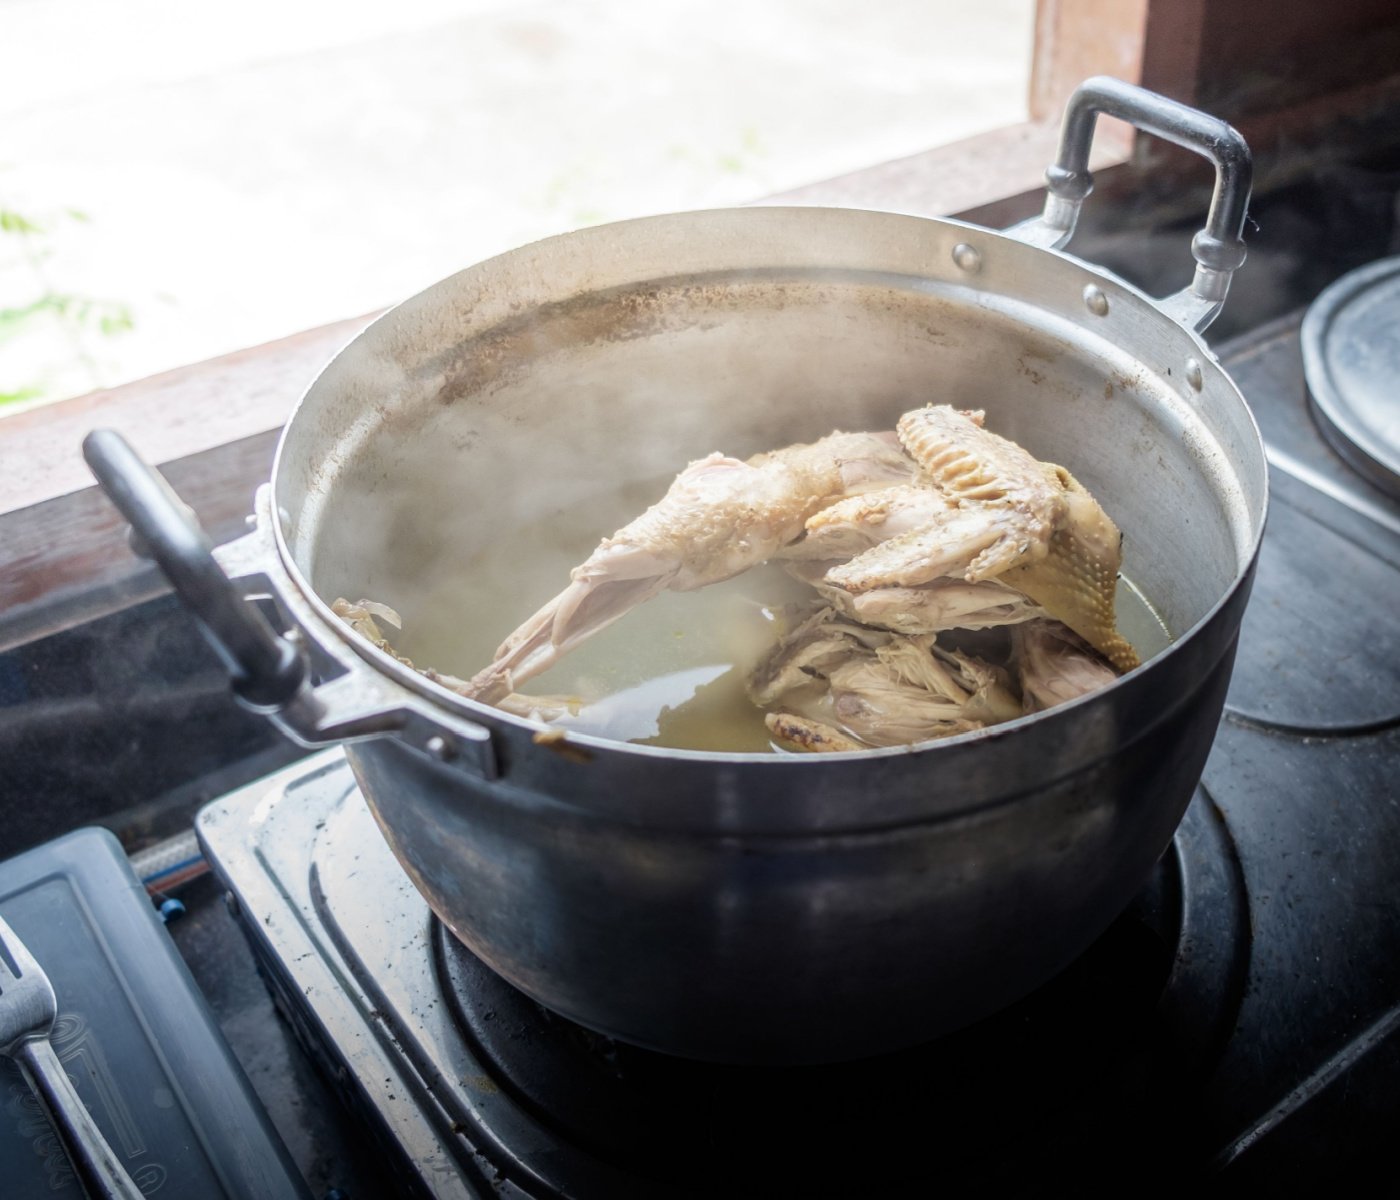 chicken boiled too long in pot